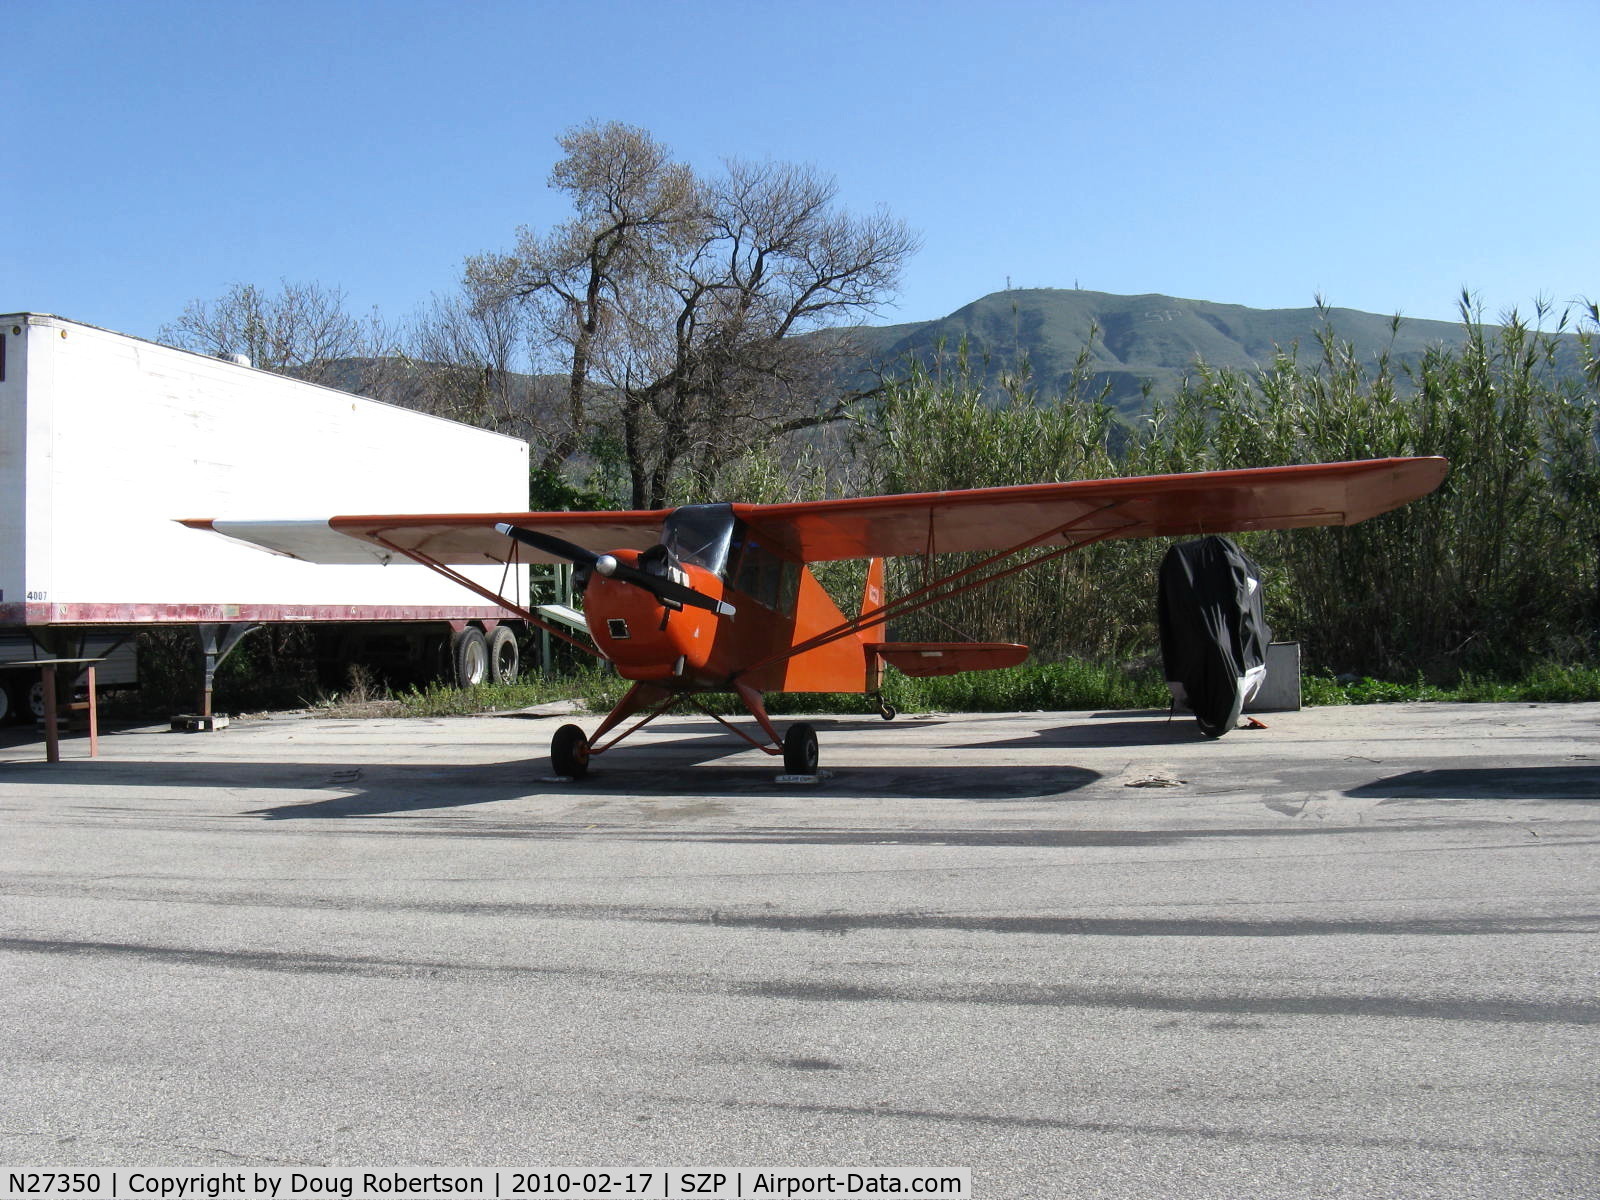 N27350, 1940 Aeronca 60-TF C/N 1630T, 1940 Aeronca 60-TF DEFENDER, Franklin 4AC150-A 60 Hp, quite rare model now, nearly identical to Army O-58/L-3